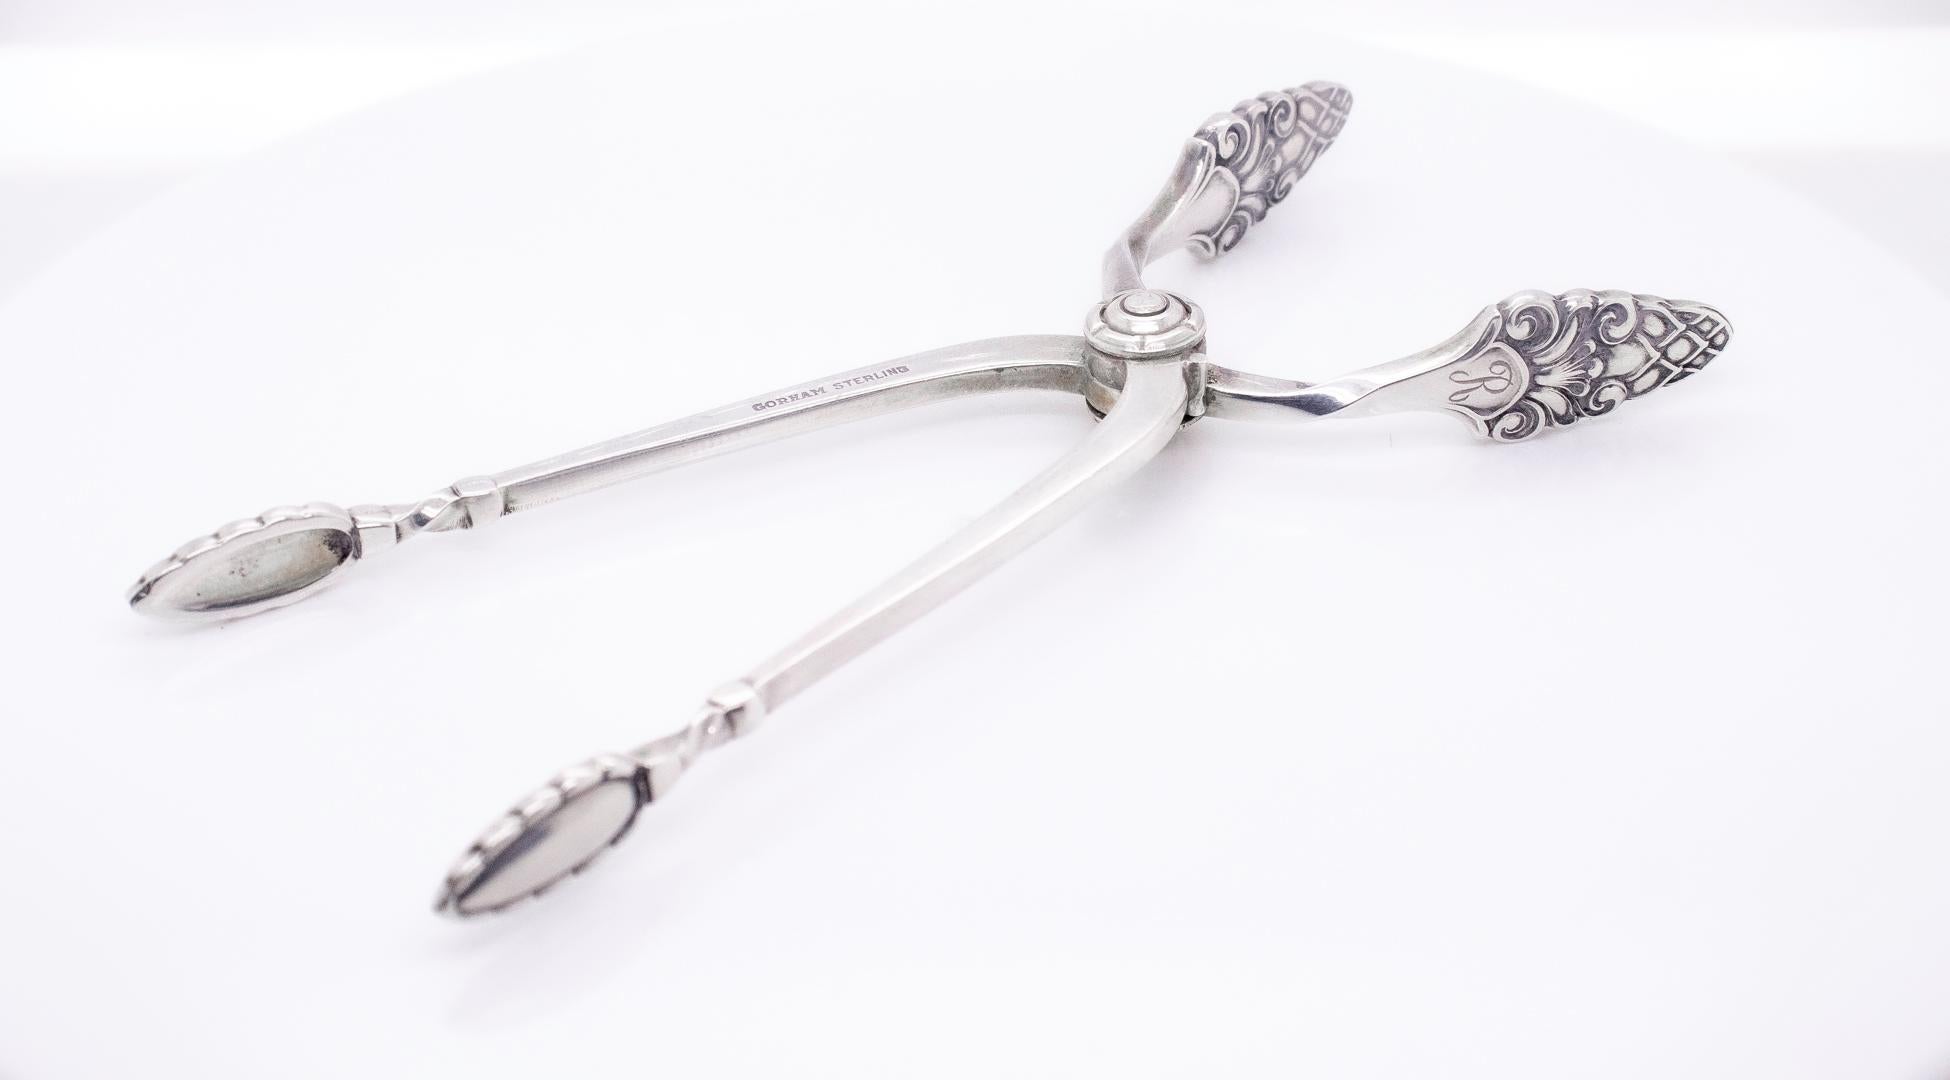 Modernist Mid-Century Modern Gorham Sterling Silver Old Sovereign Sugar Tongs or Nips  For Sale